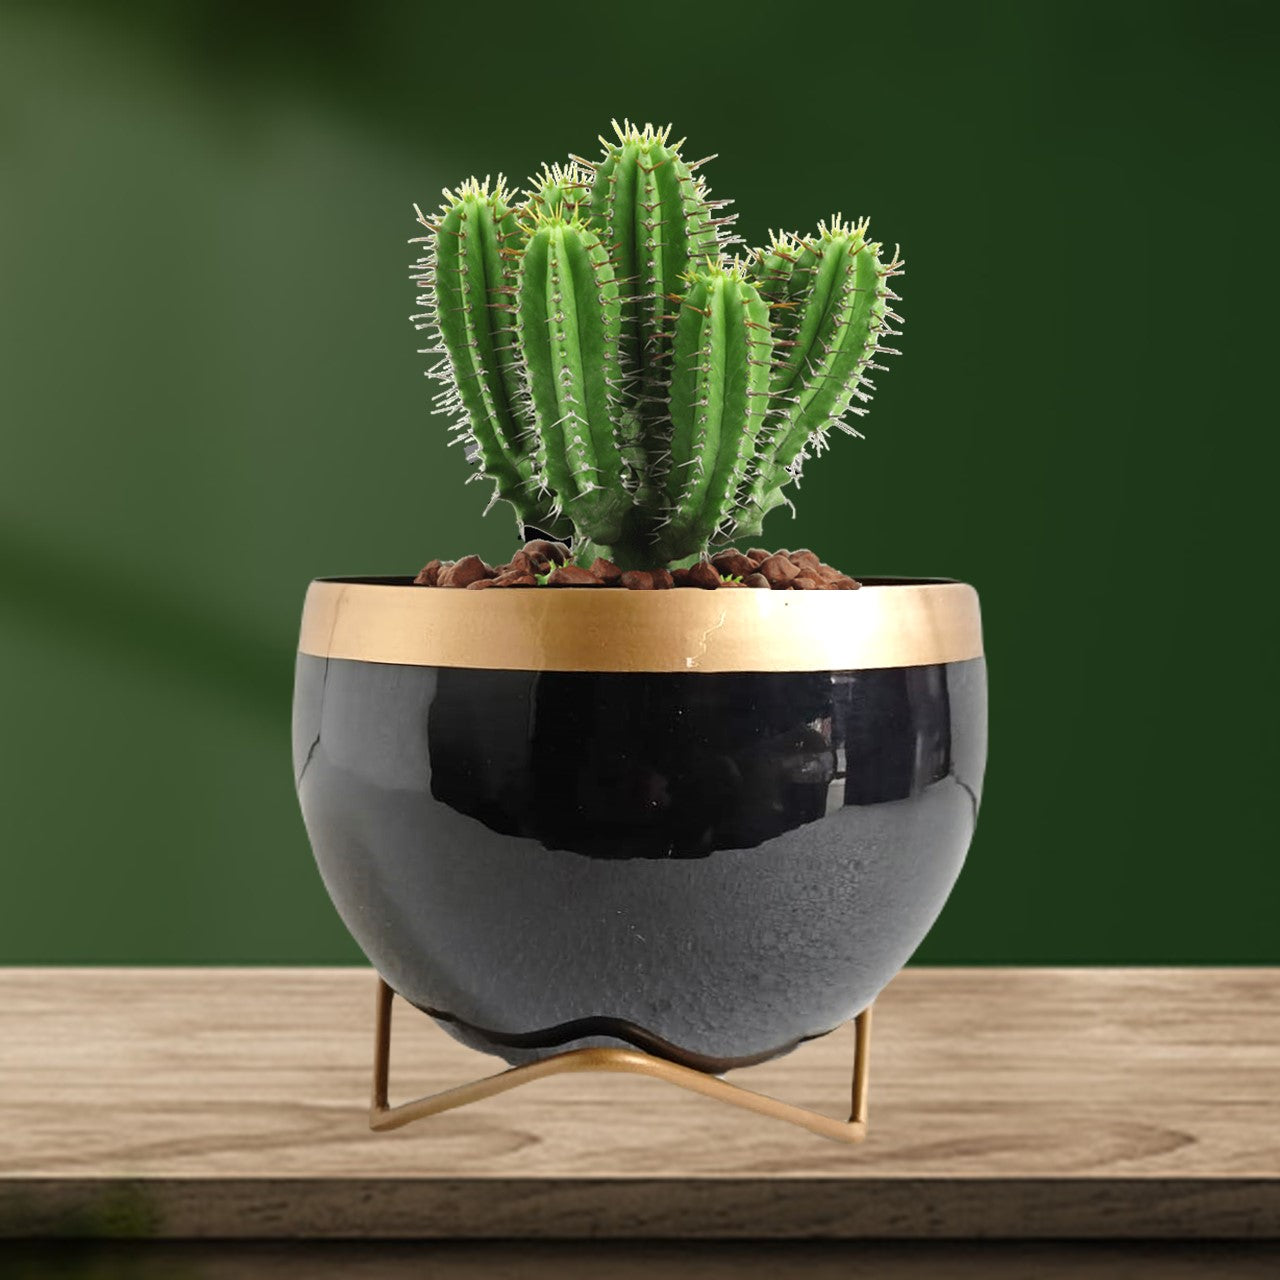 ecofynd 5 inches Elis Black Metal Planter Pot with Gold Stand Planter freeshipping - Ecofynd